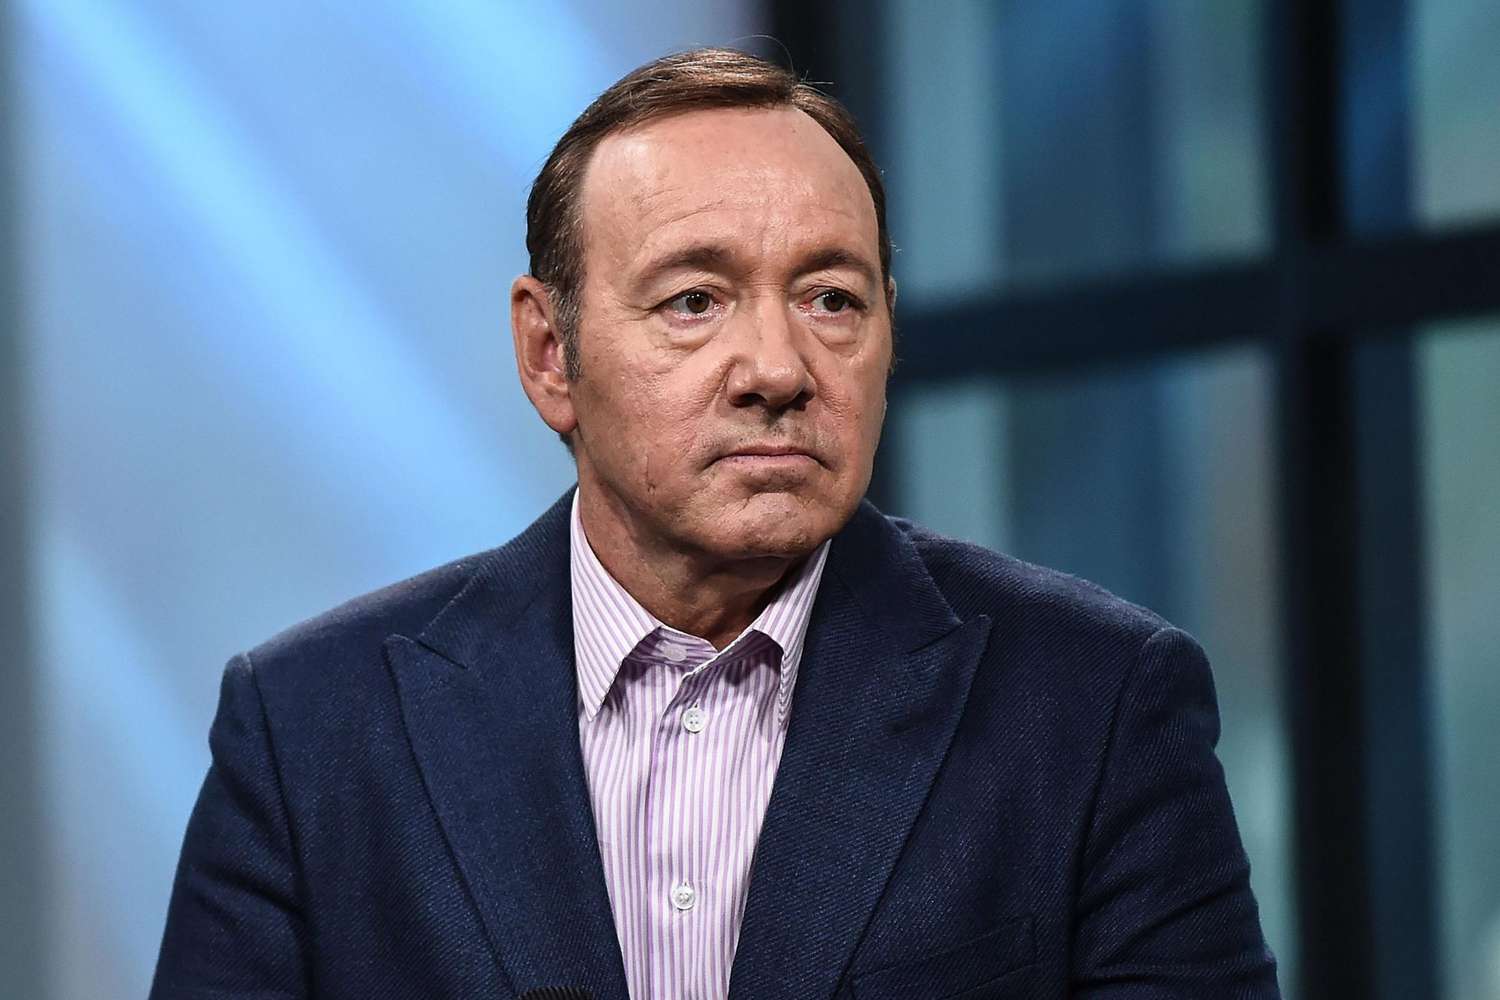 Build Presents Kevin Spacey Discussing His New Play "Clarence Darrow" And Hosting The Tony Awards